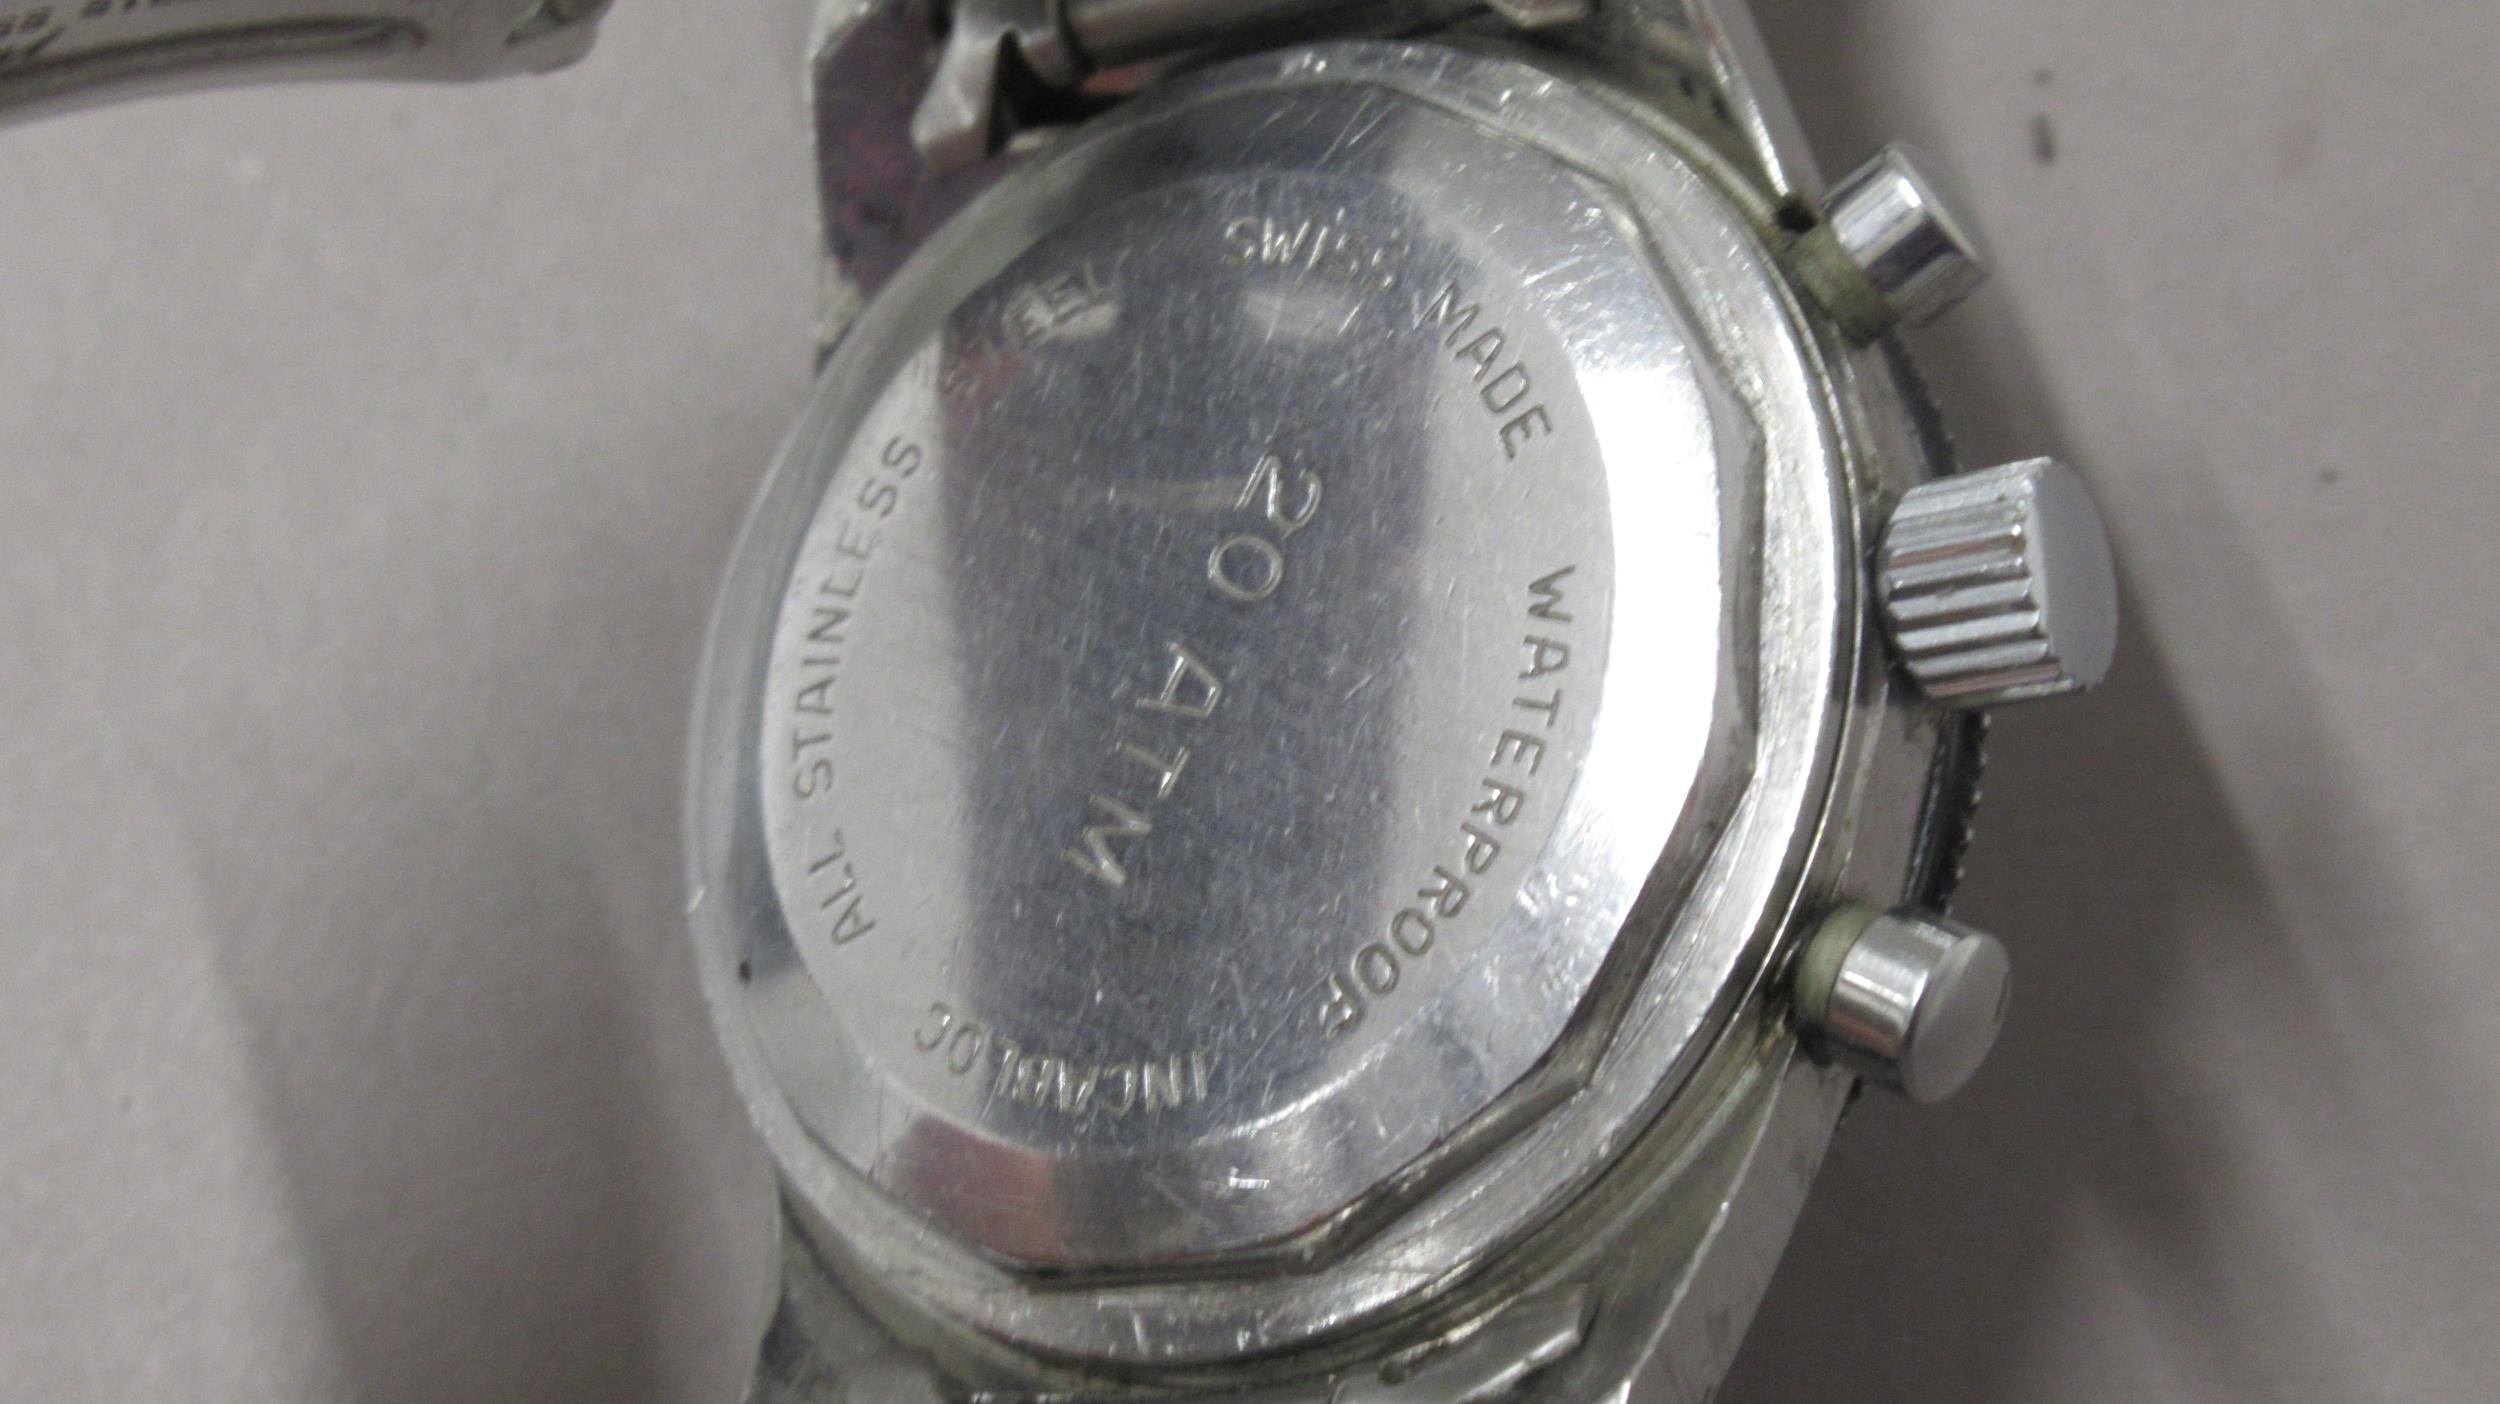 AVIA. Marino 1960's divers chronograph. 36mm. Crisp operation and keeping excellent time. - Image 3 of 3